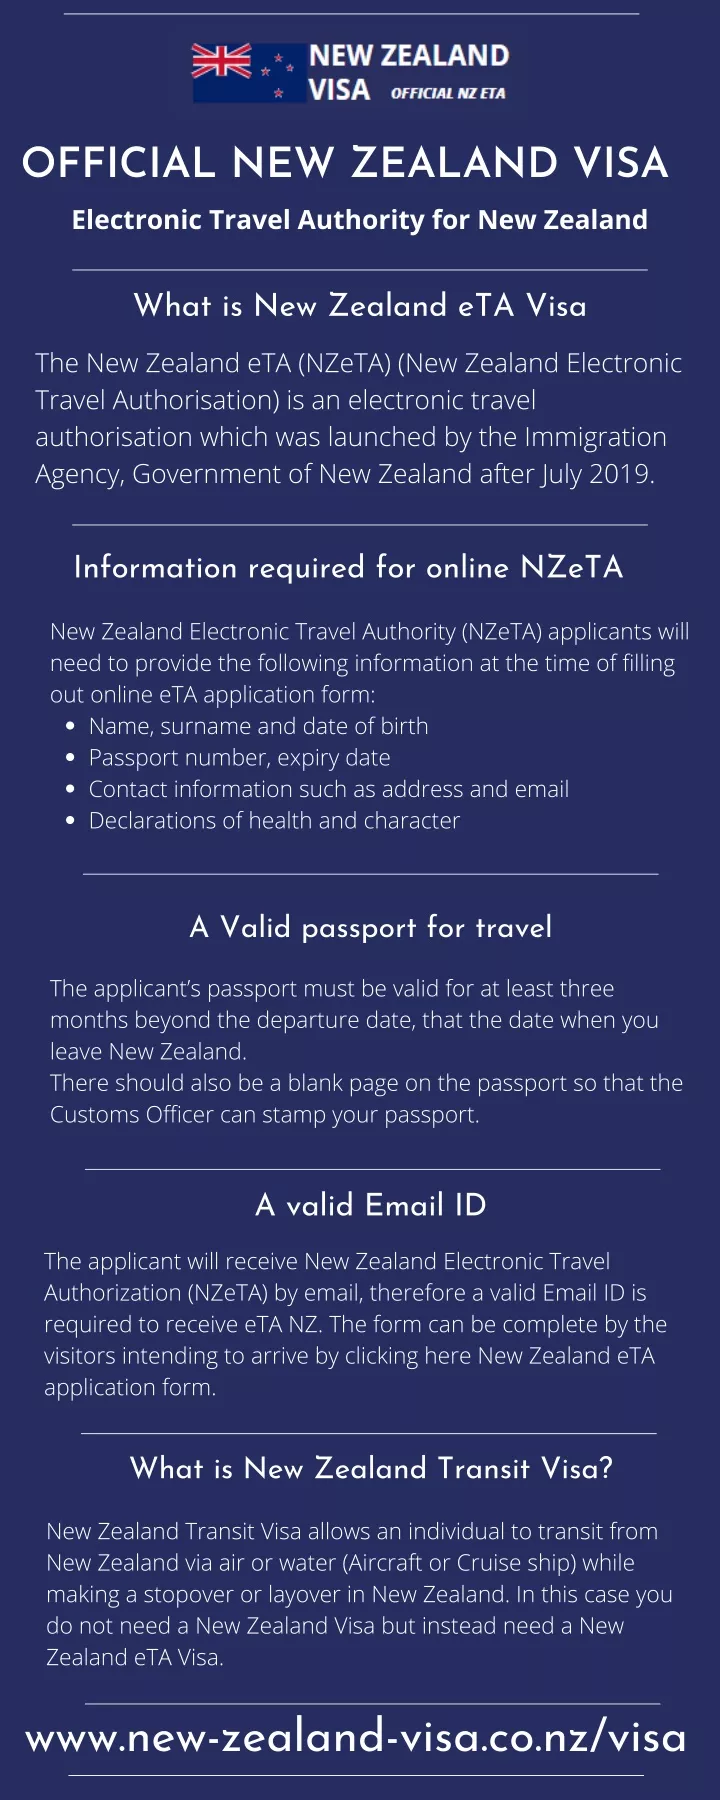 Ppt Official New Zealand Visa Nzeta Electronic Travel Authority For New Zealand Powerpoint 7708